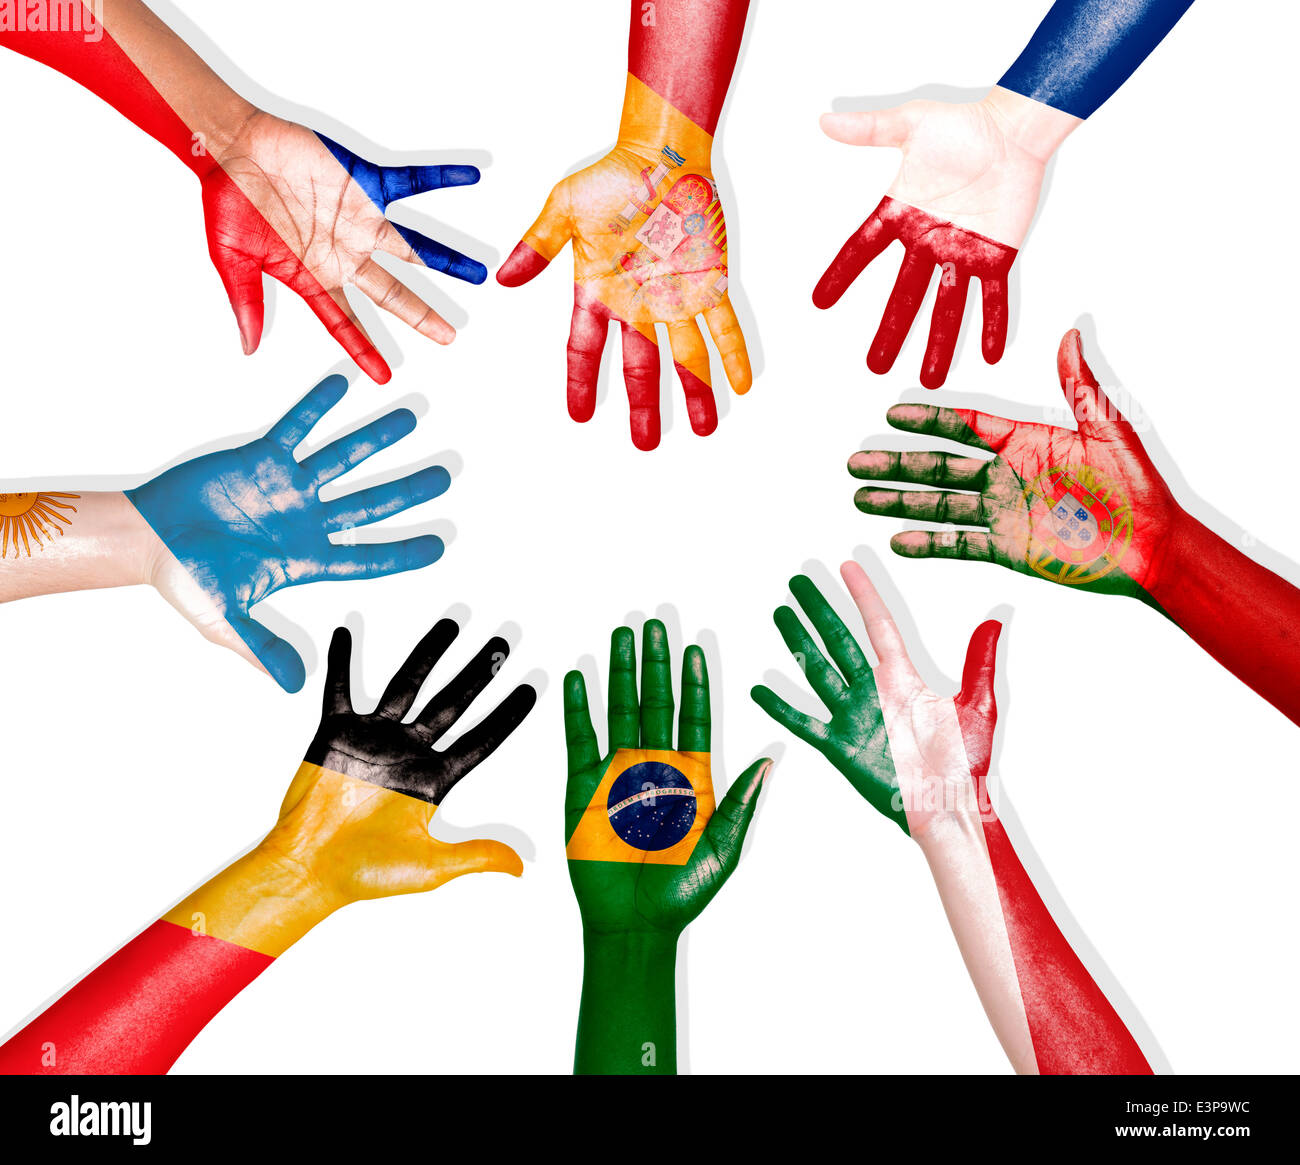 Multi-National Flags Drawn on Hands Forming a Circle Stock Photo